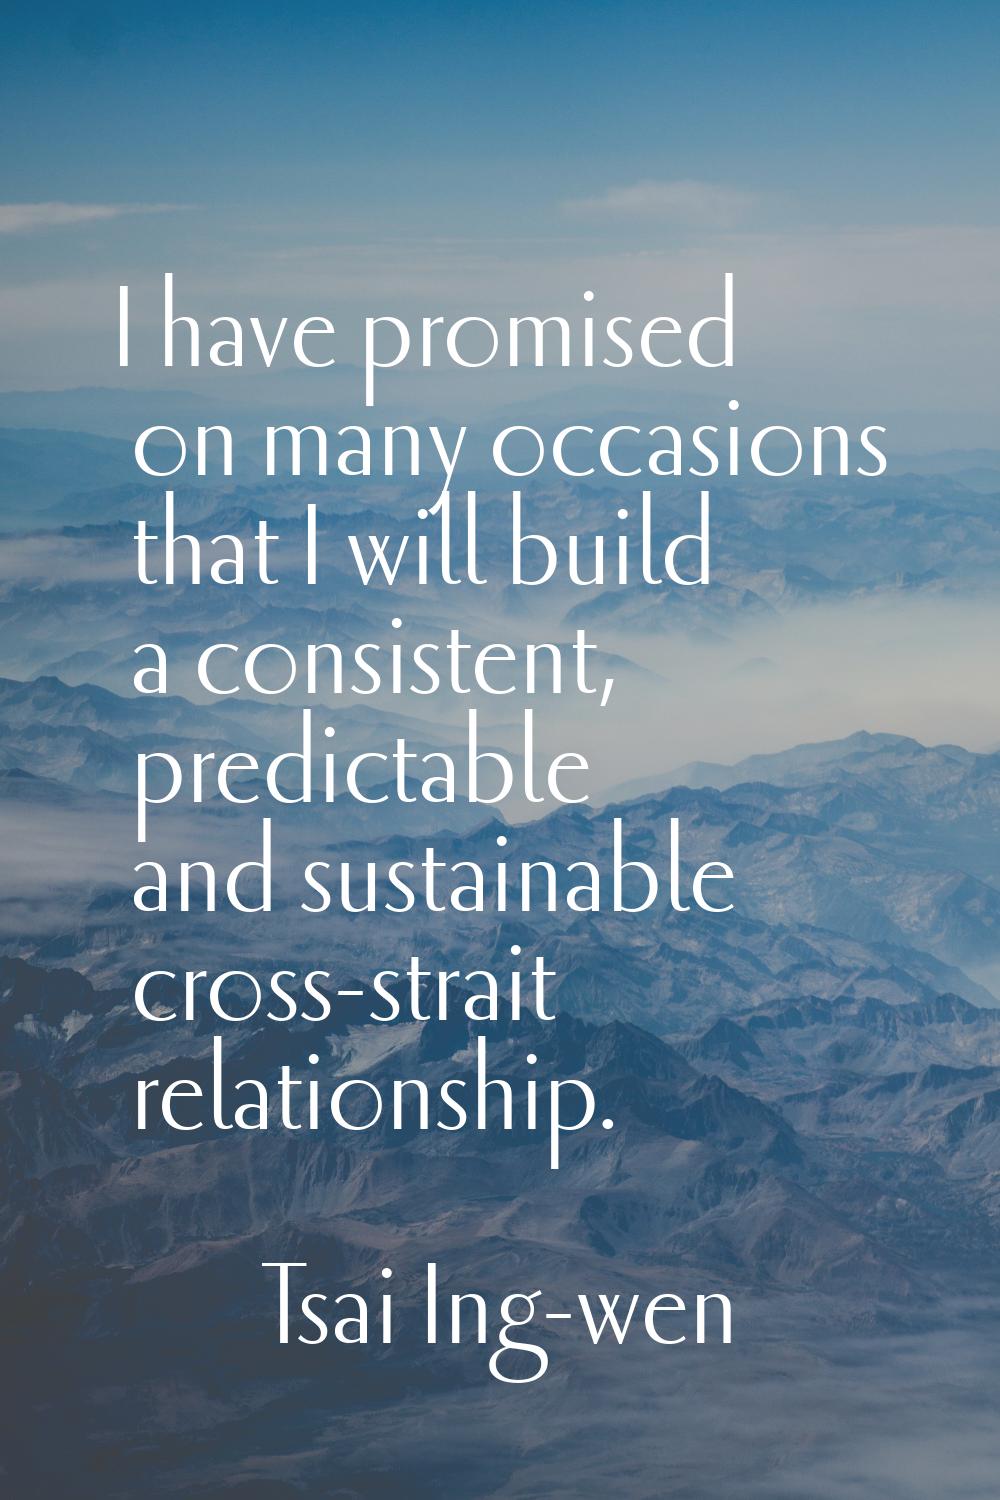 I have promised on many occasions that I will build a consistent, predictable and sustainable cross